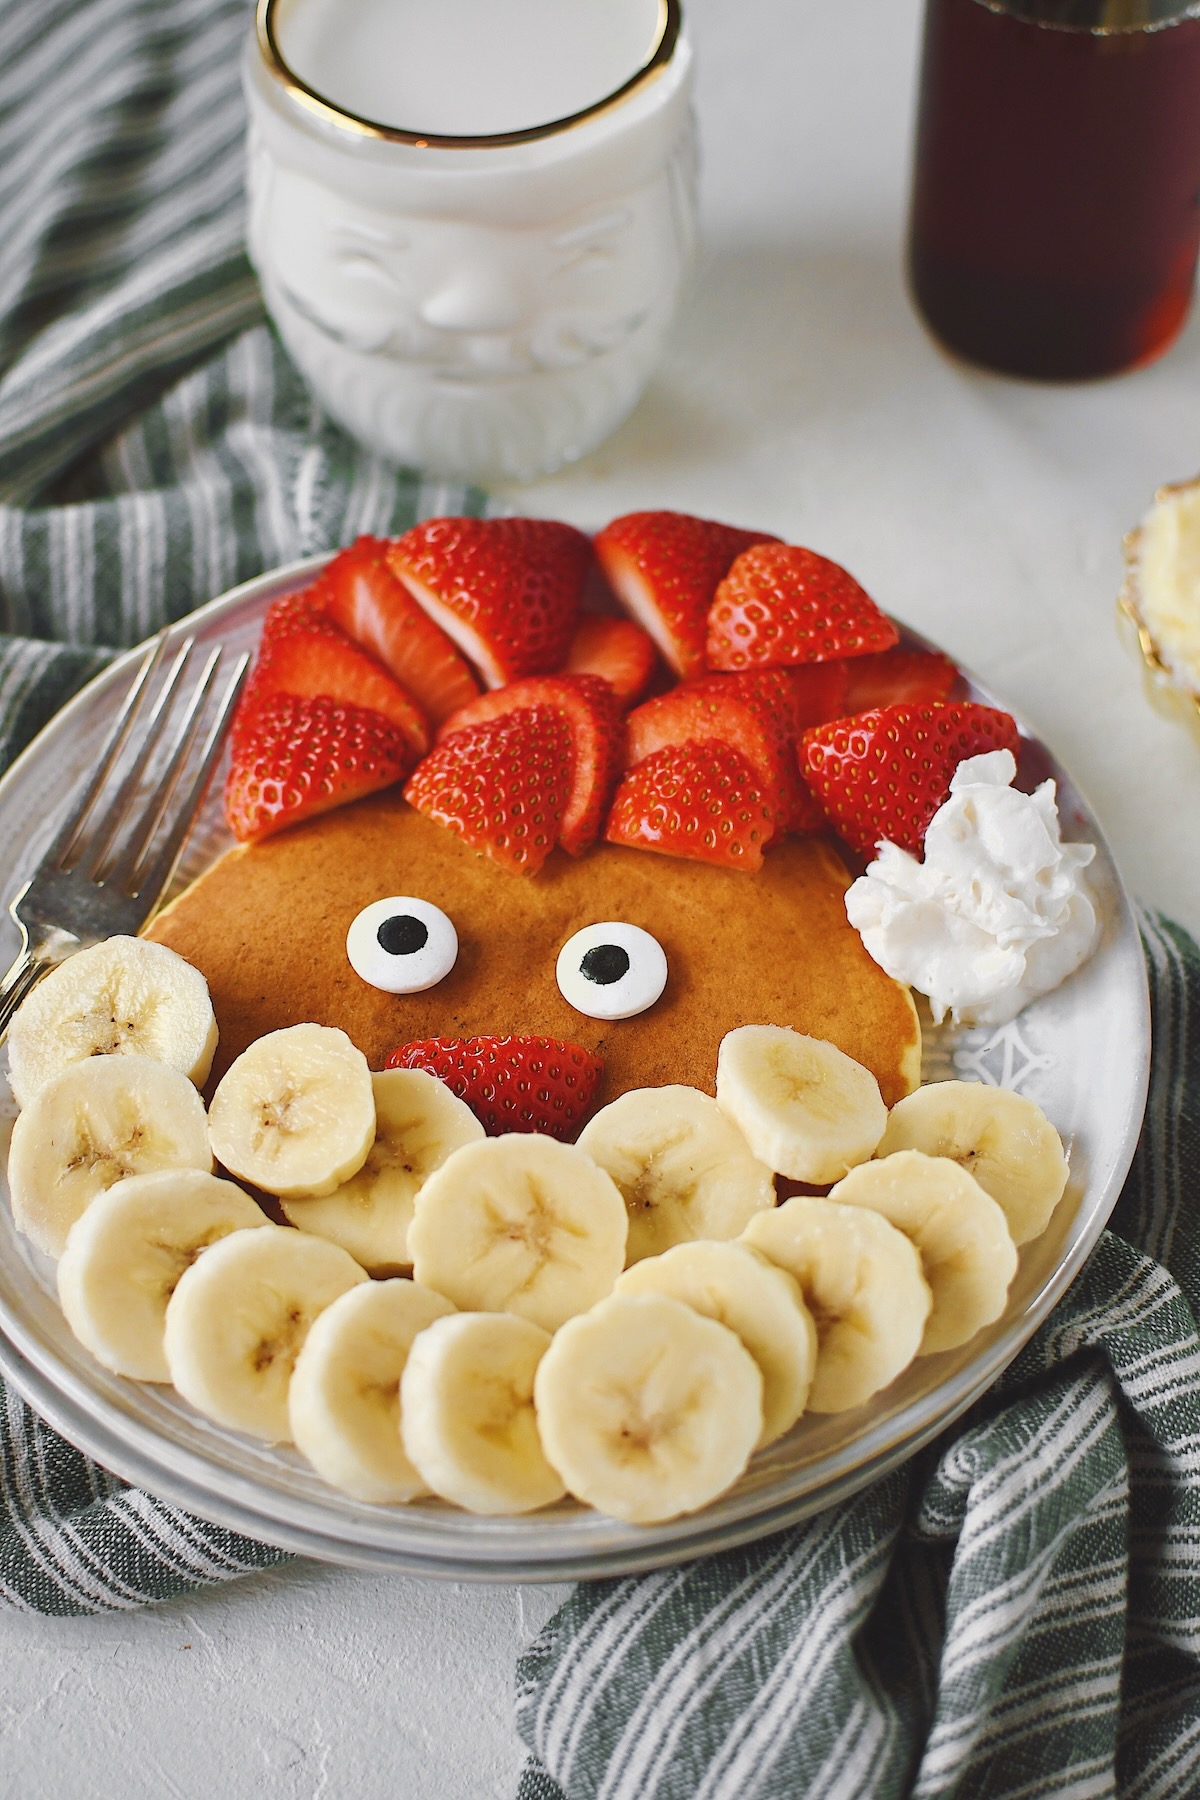 Santa pancakes on a plate with strawberries and bananas making his hat and beard.